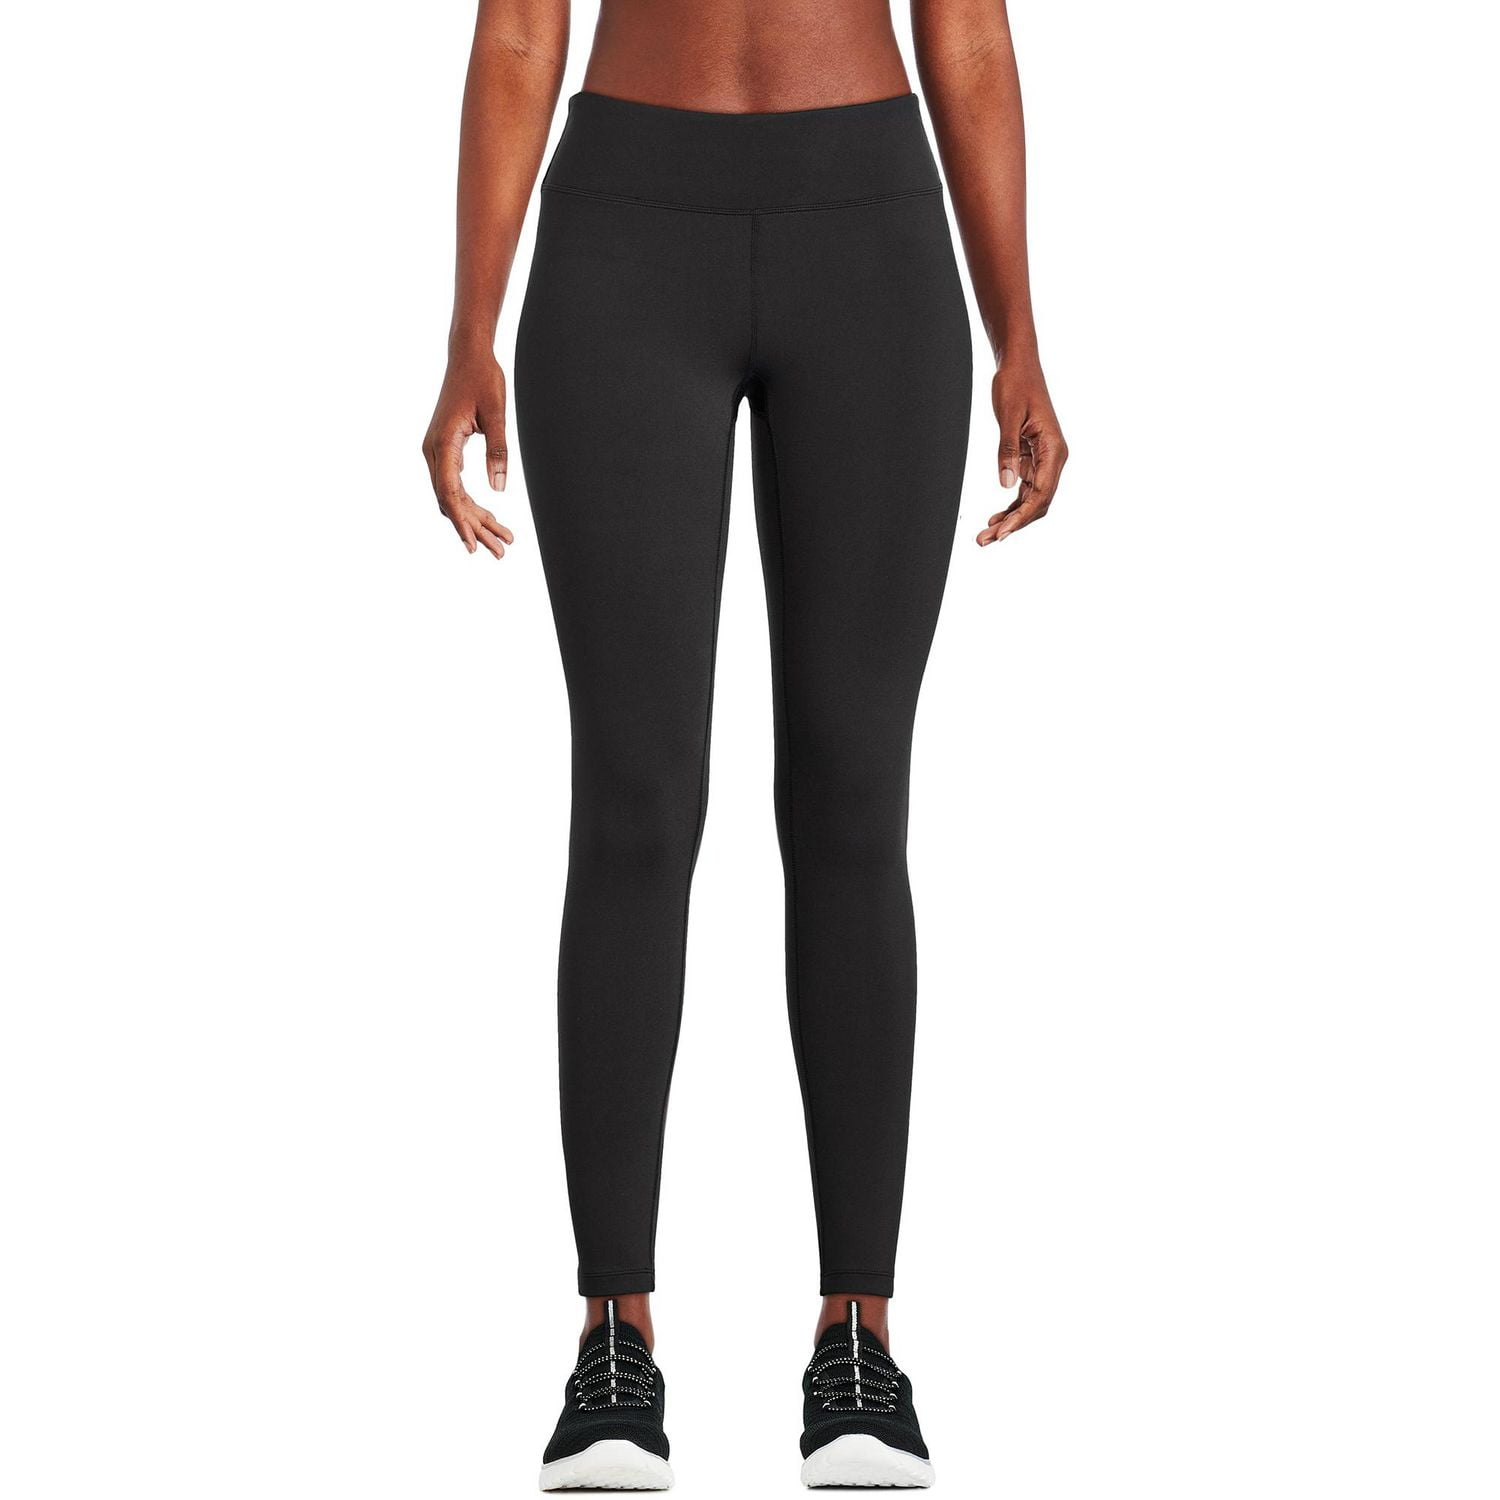 New Athletic Works Women's Mid-Weight Thermal Pant, Black, Sz S